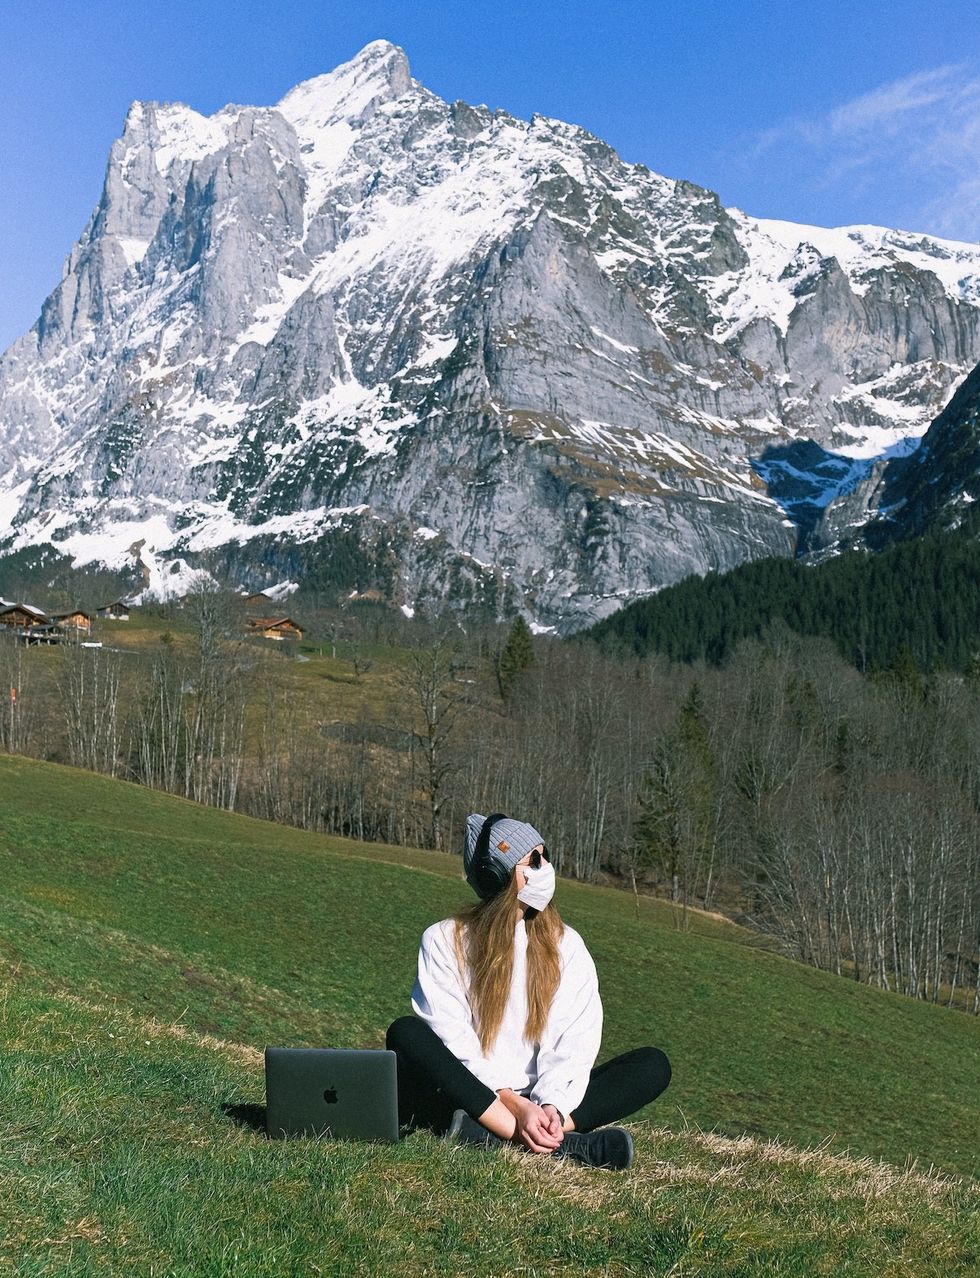 wearing a mask outside in the alps